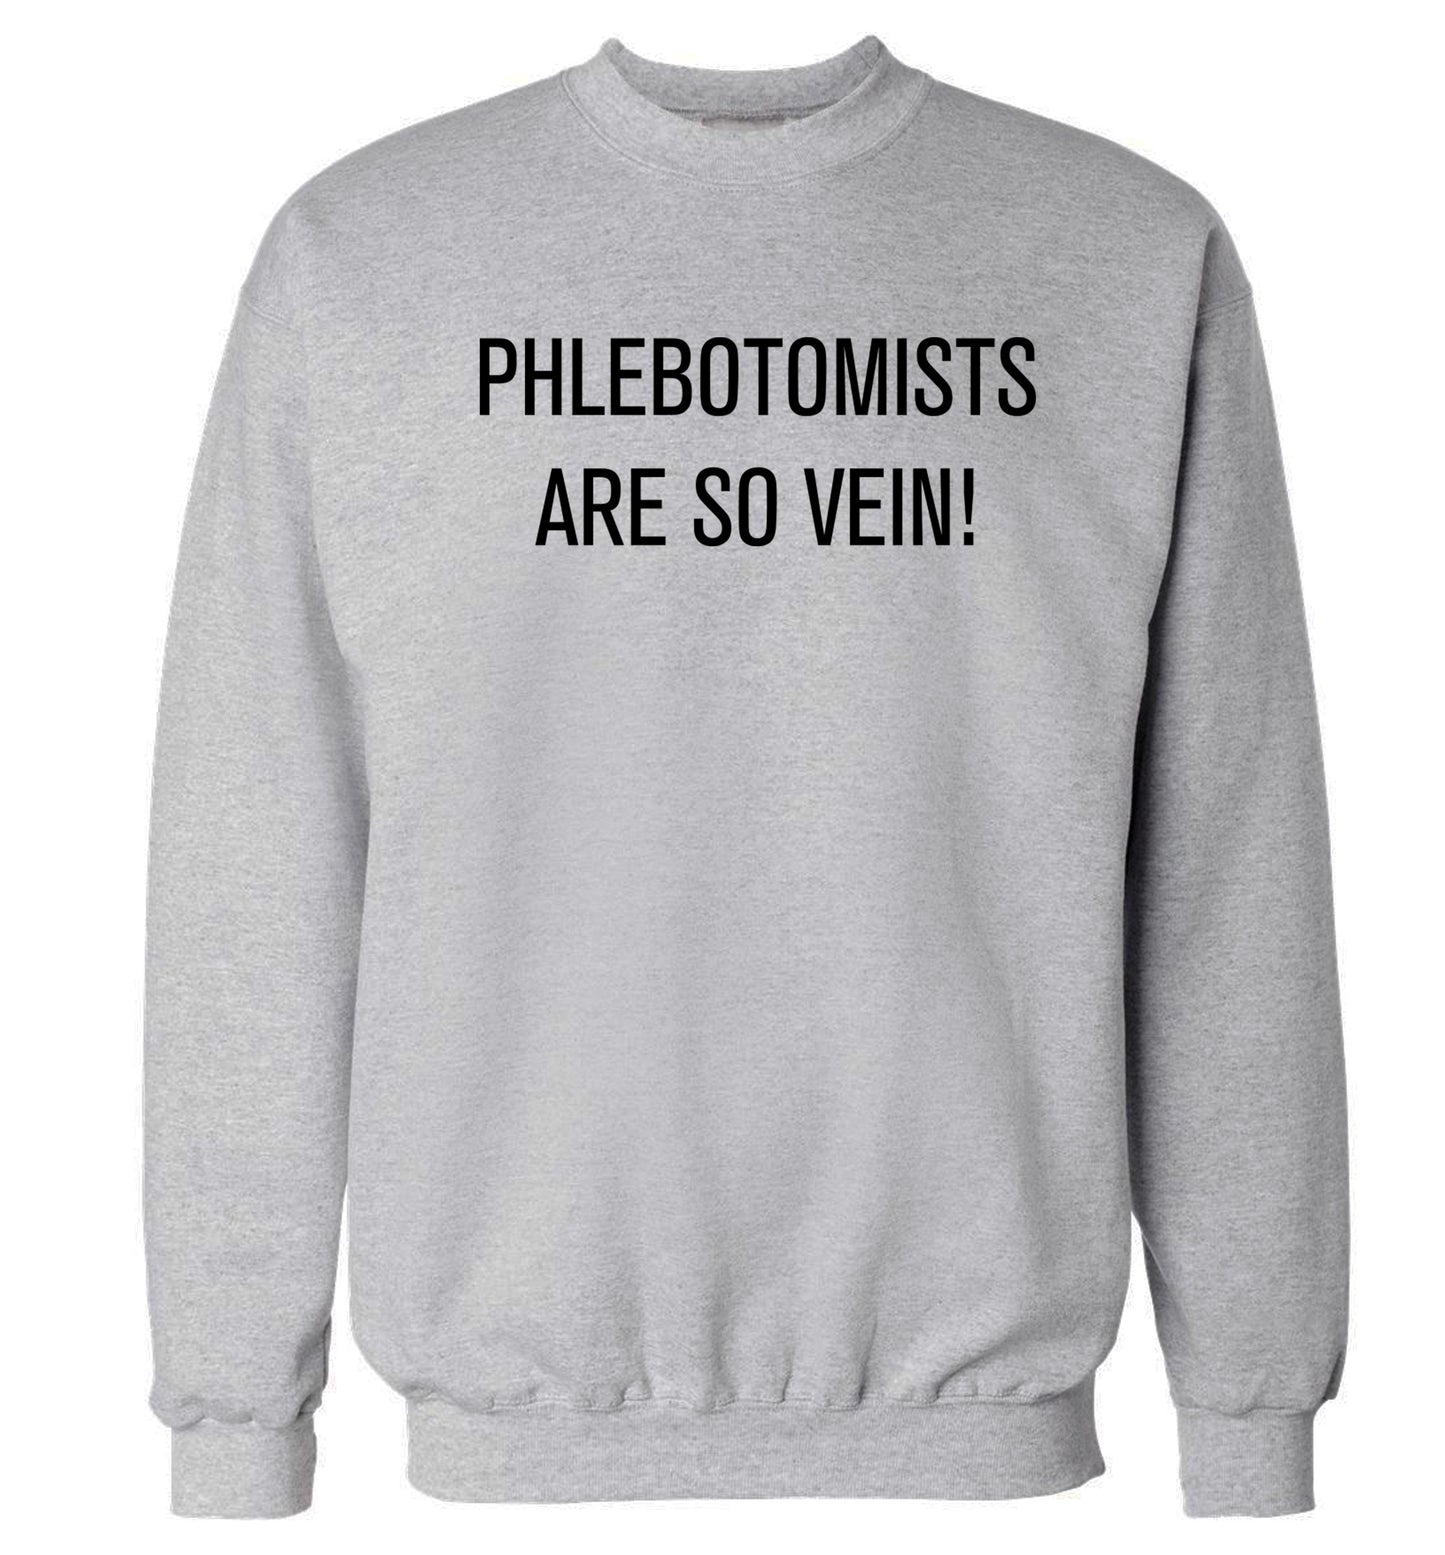 Phlebotomists are so vein! Adult's unisex grey Sweater 2XL